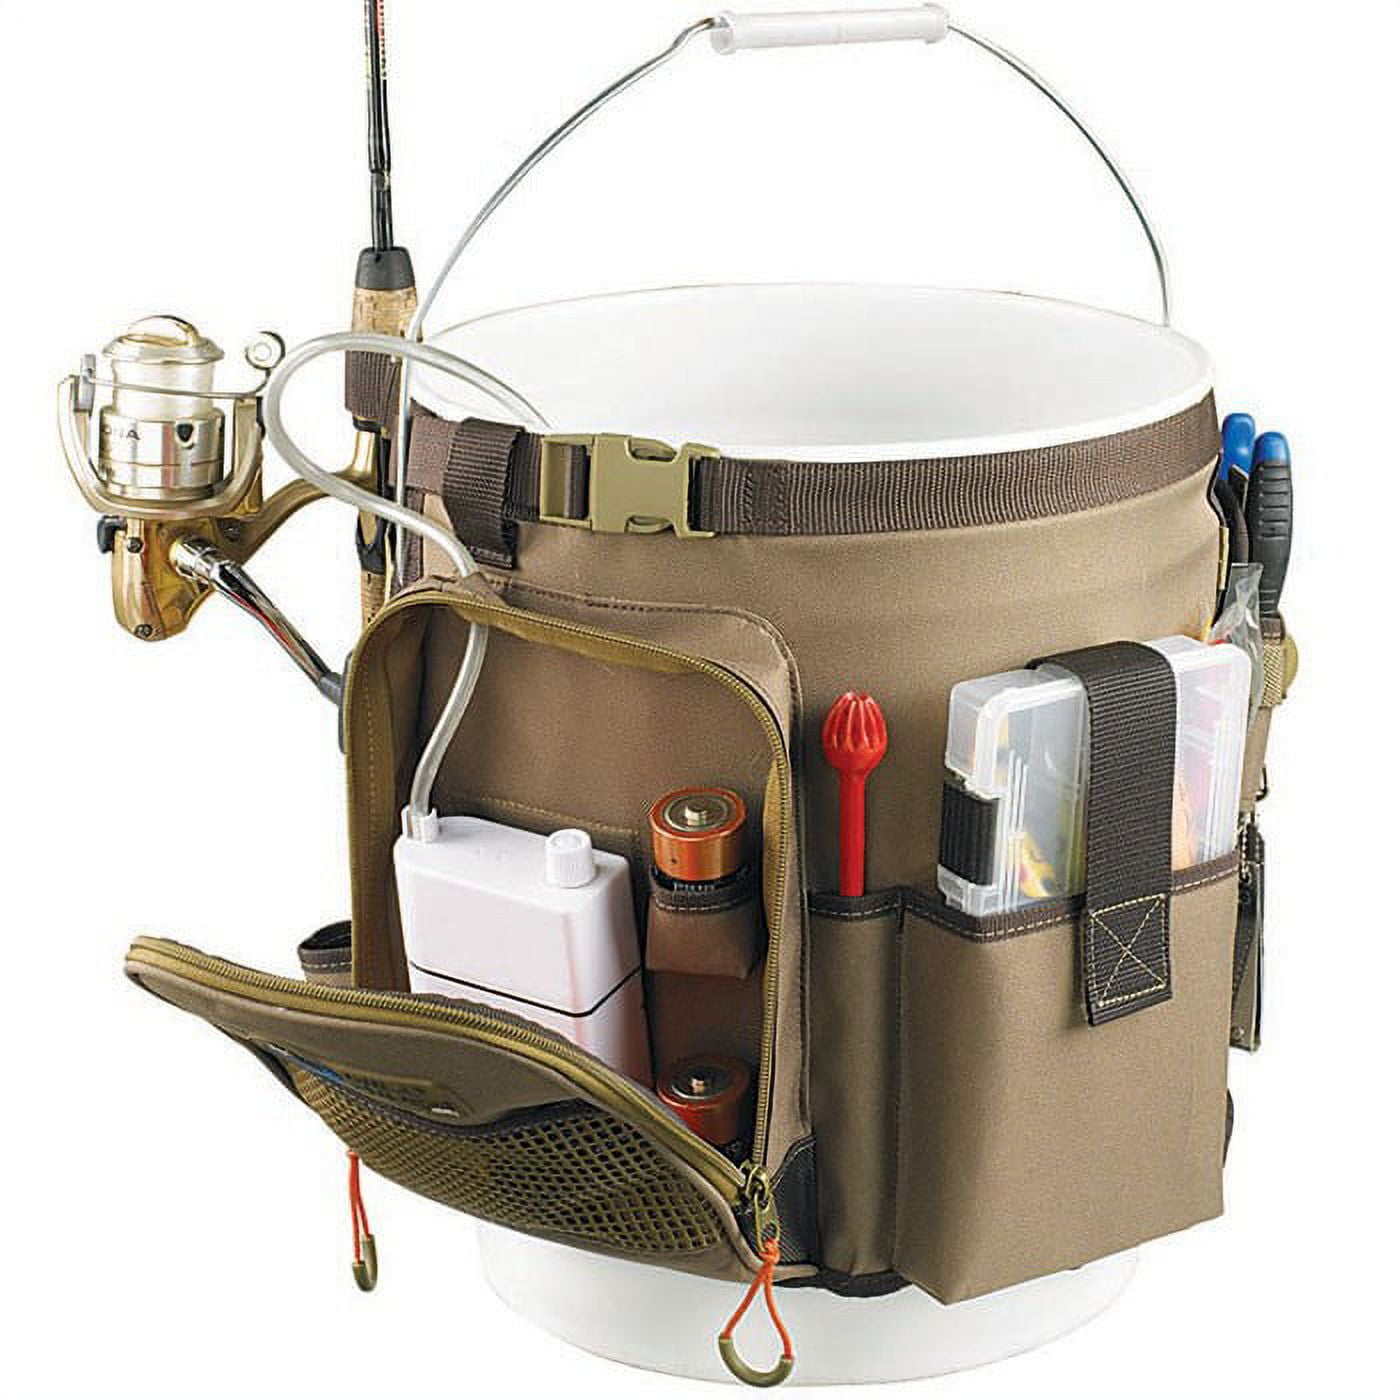 Riverruns Ice Fishing Bucket Tool Organizer, Multiple pockets, Adjustable  Tackle Bag,Bucket and Other Fishing Gears Not Included